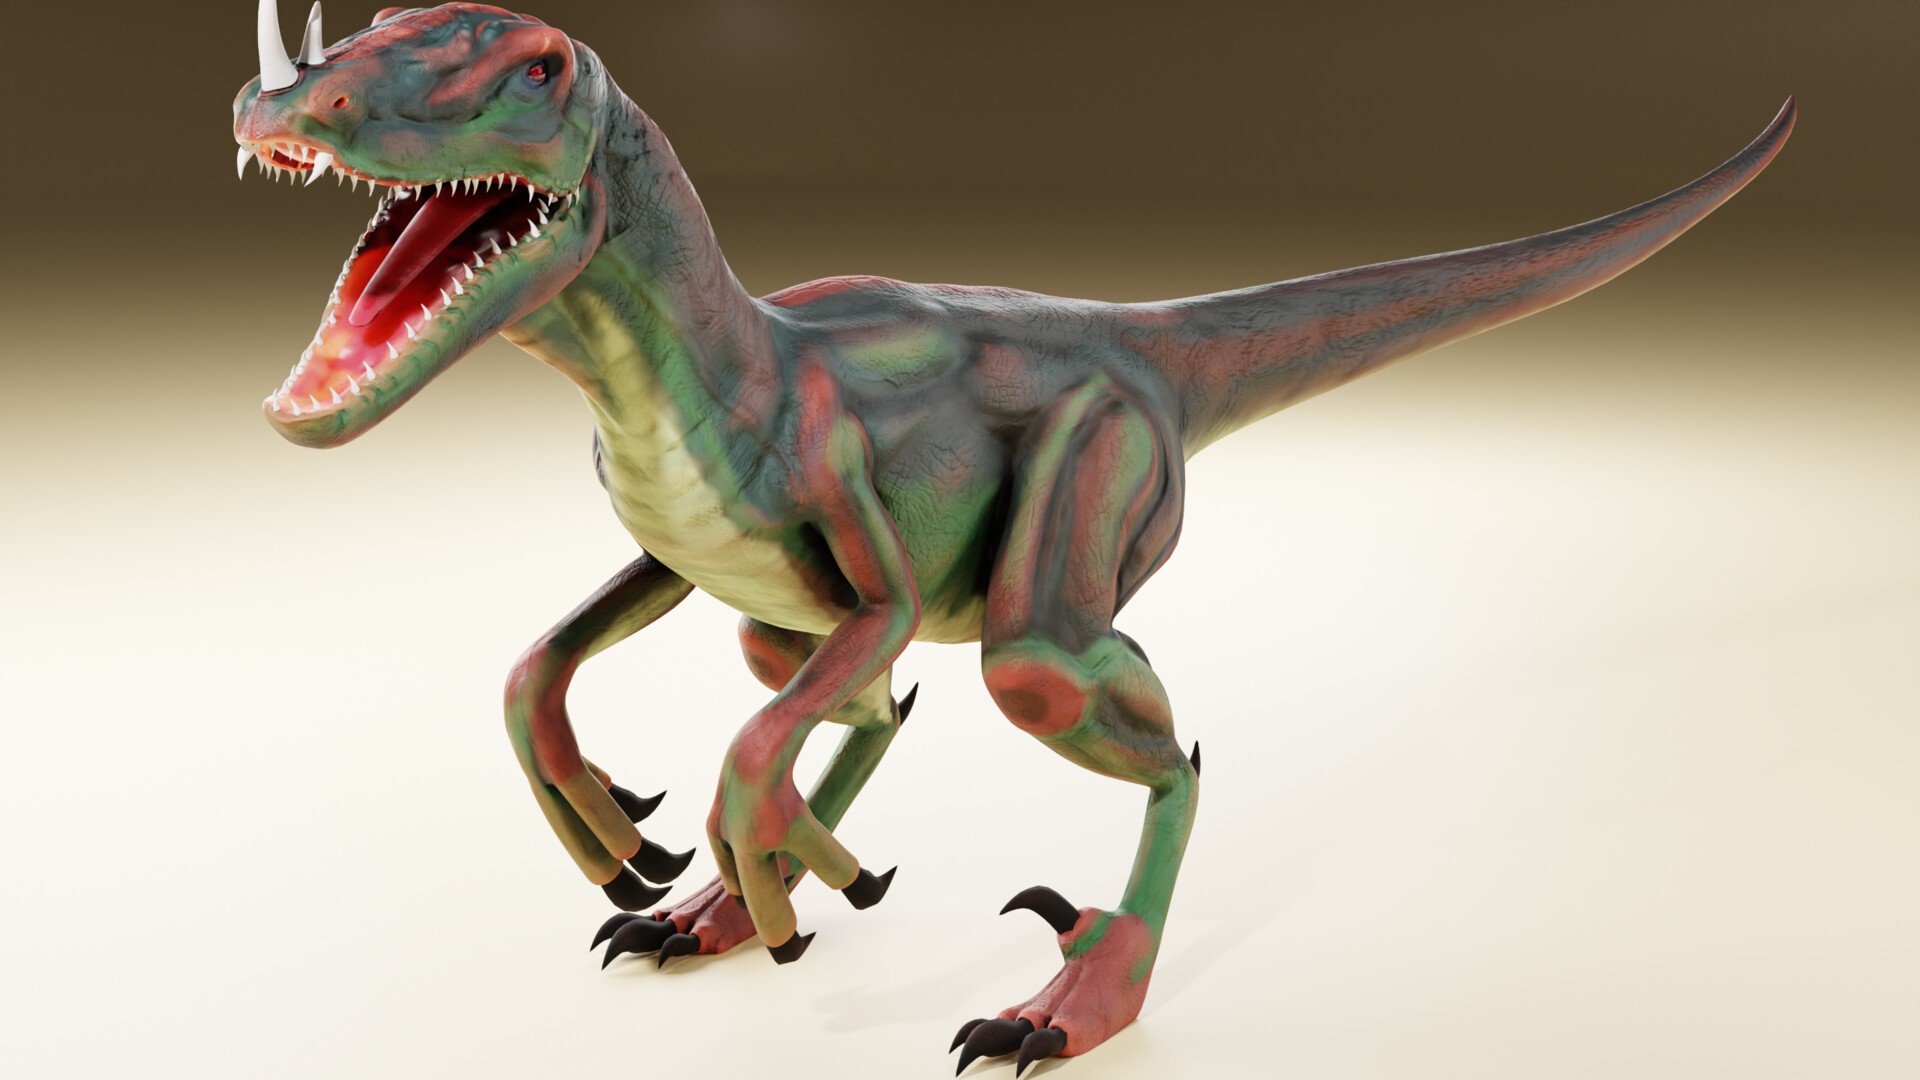 Chrome Dino - Download Free 3D model by Shadow Models 3D (@shadowmodels3d)  [7fd9ad5]